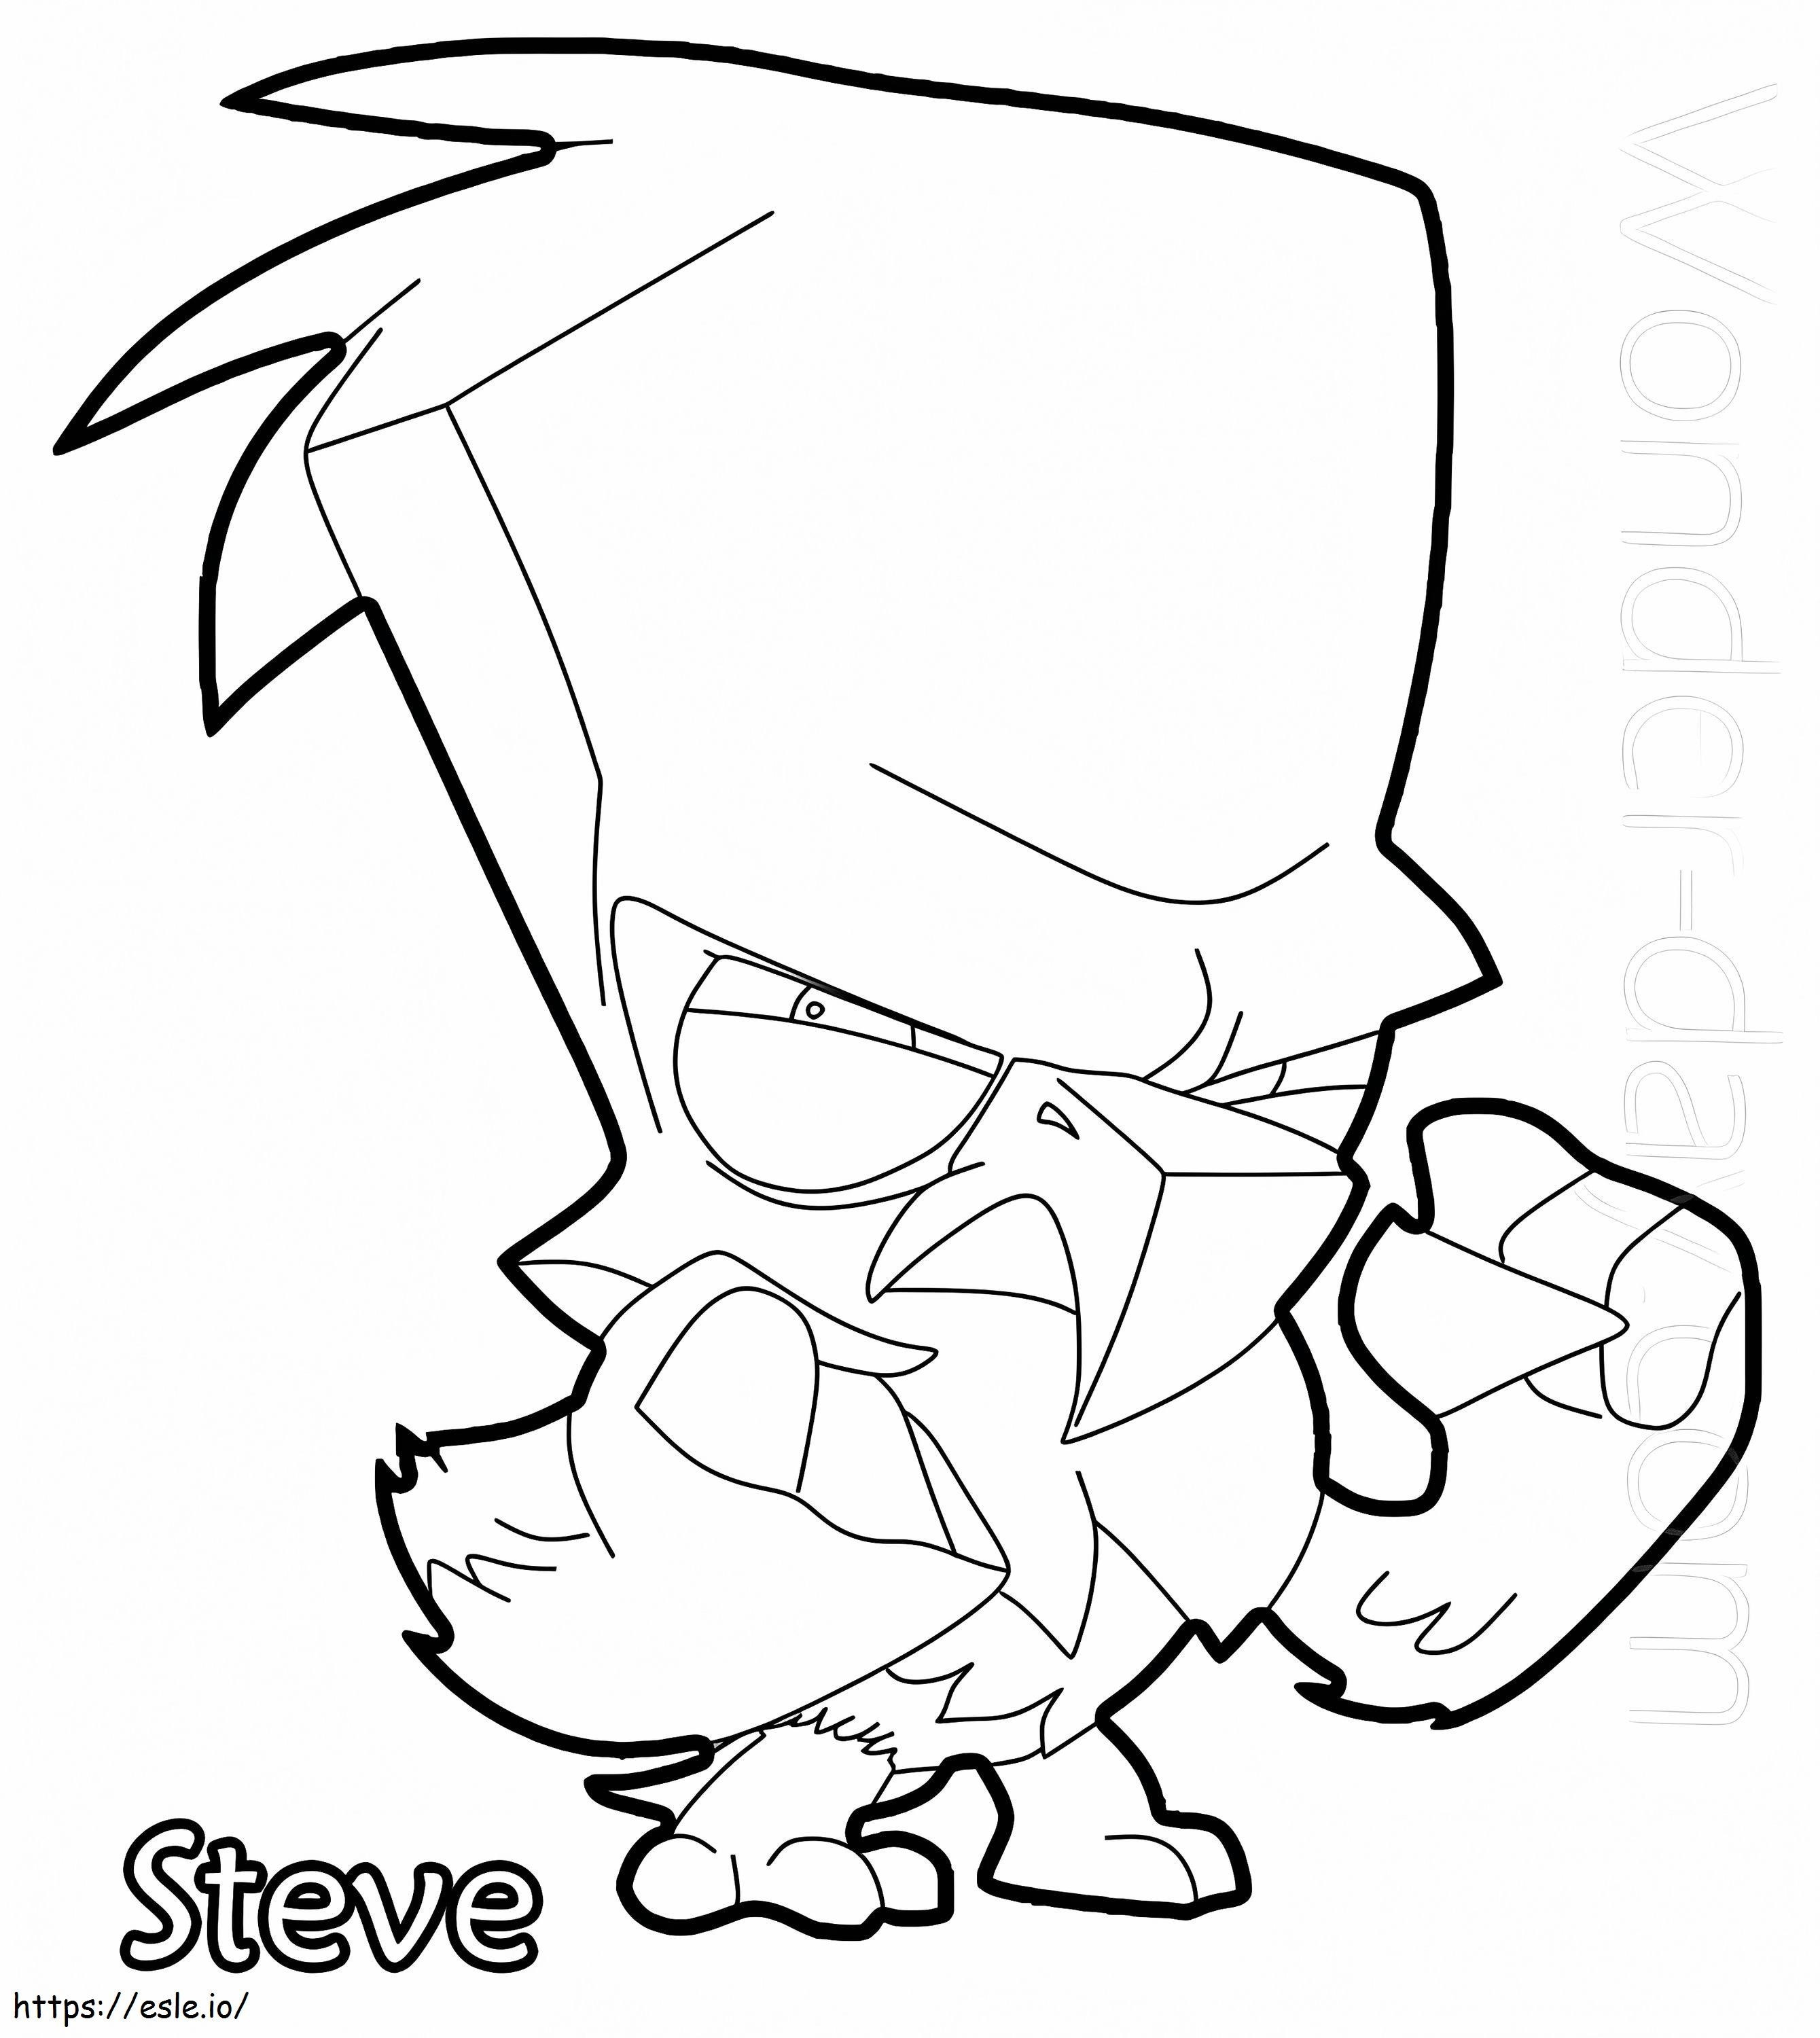 Steve Zooba coloring page